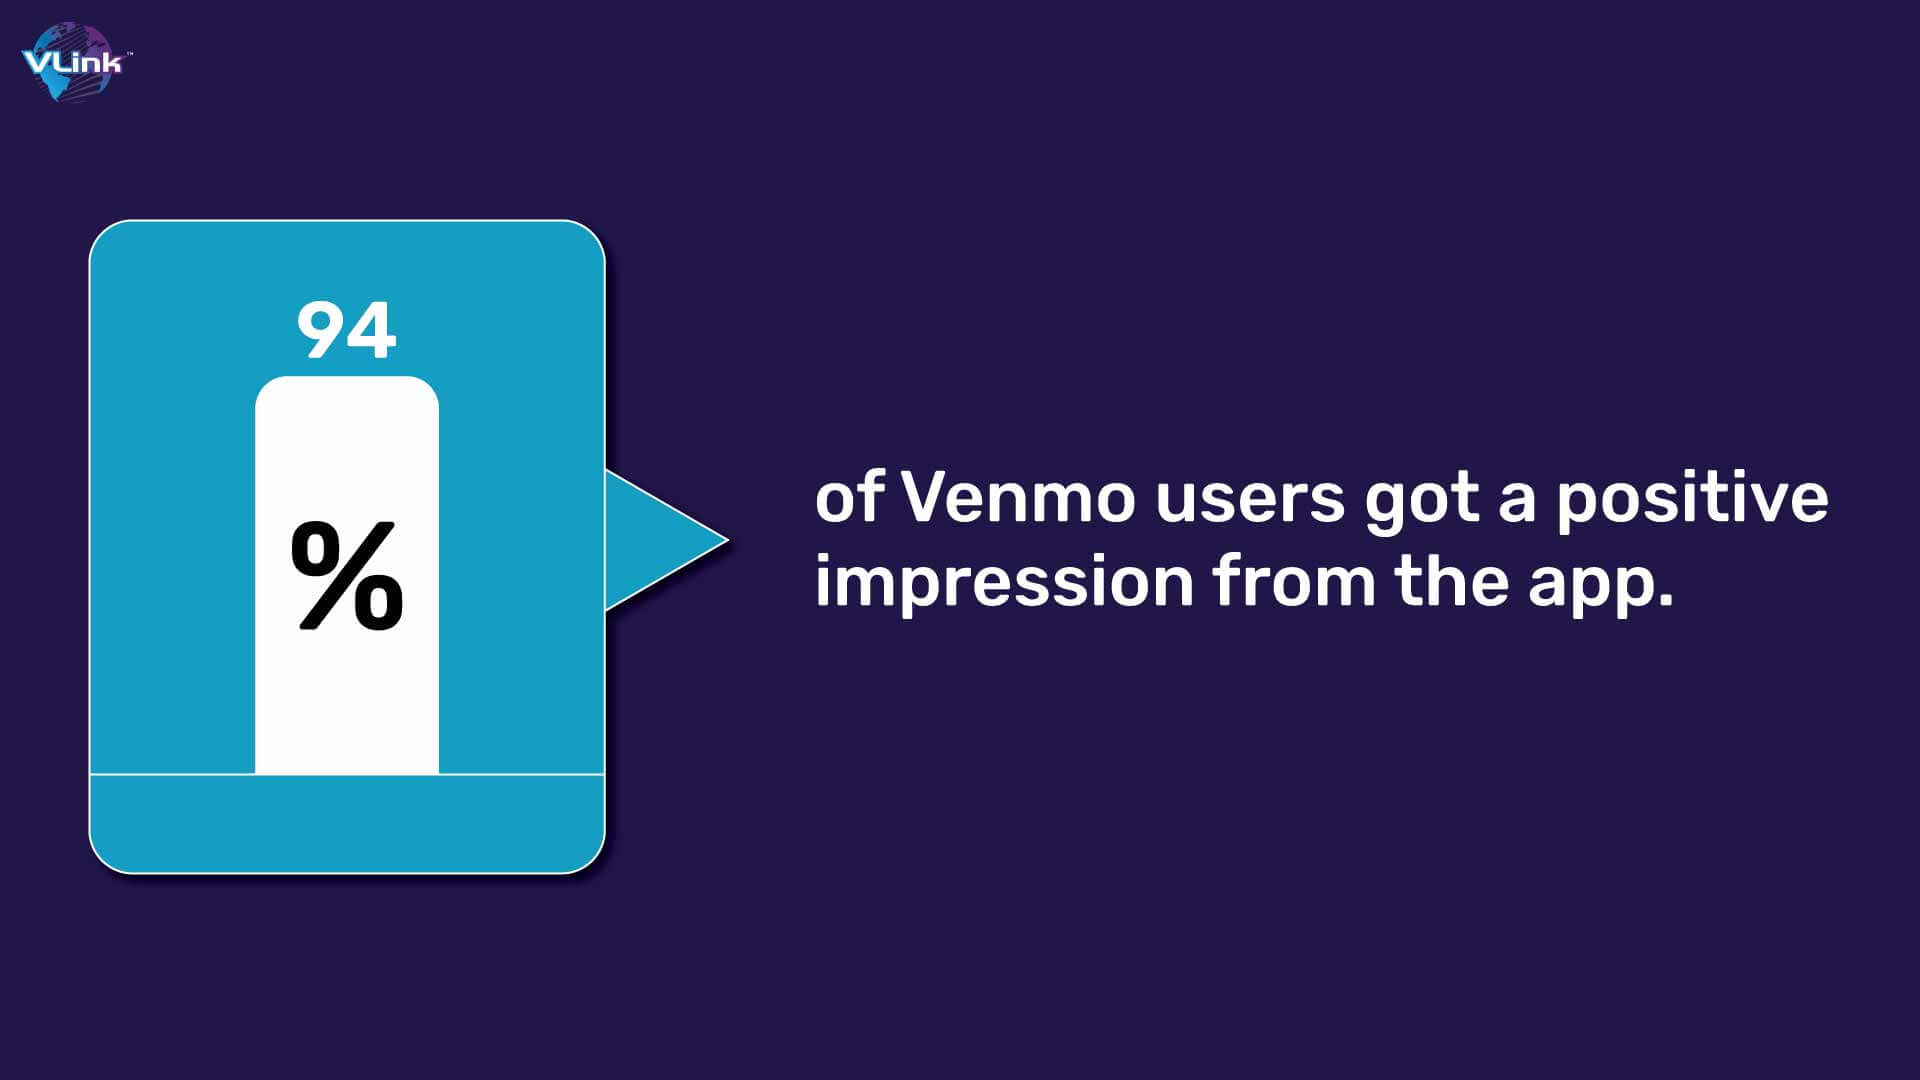 of venmo users got a positive impression from the app